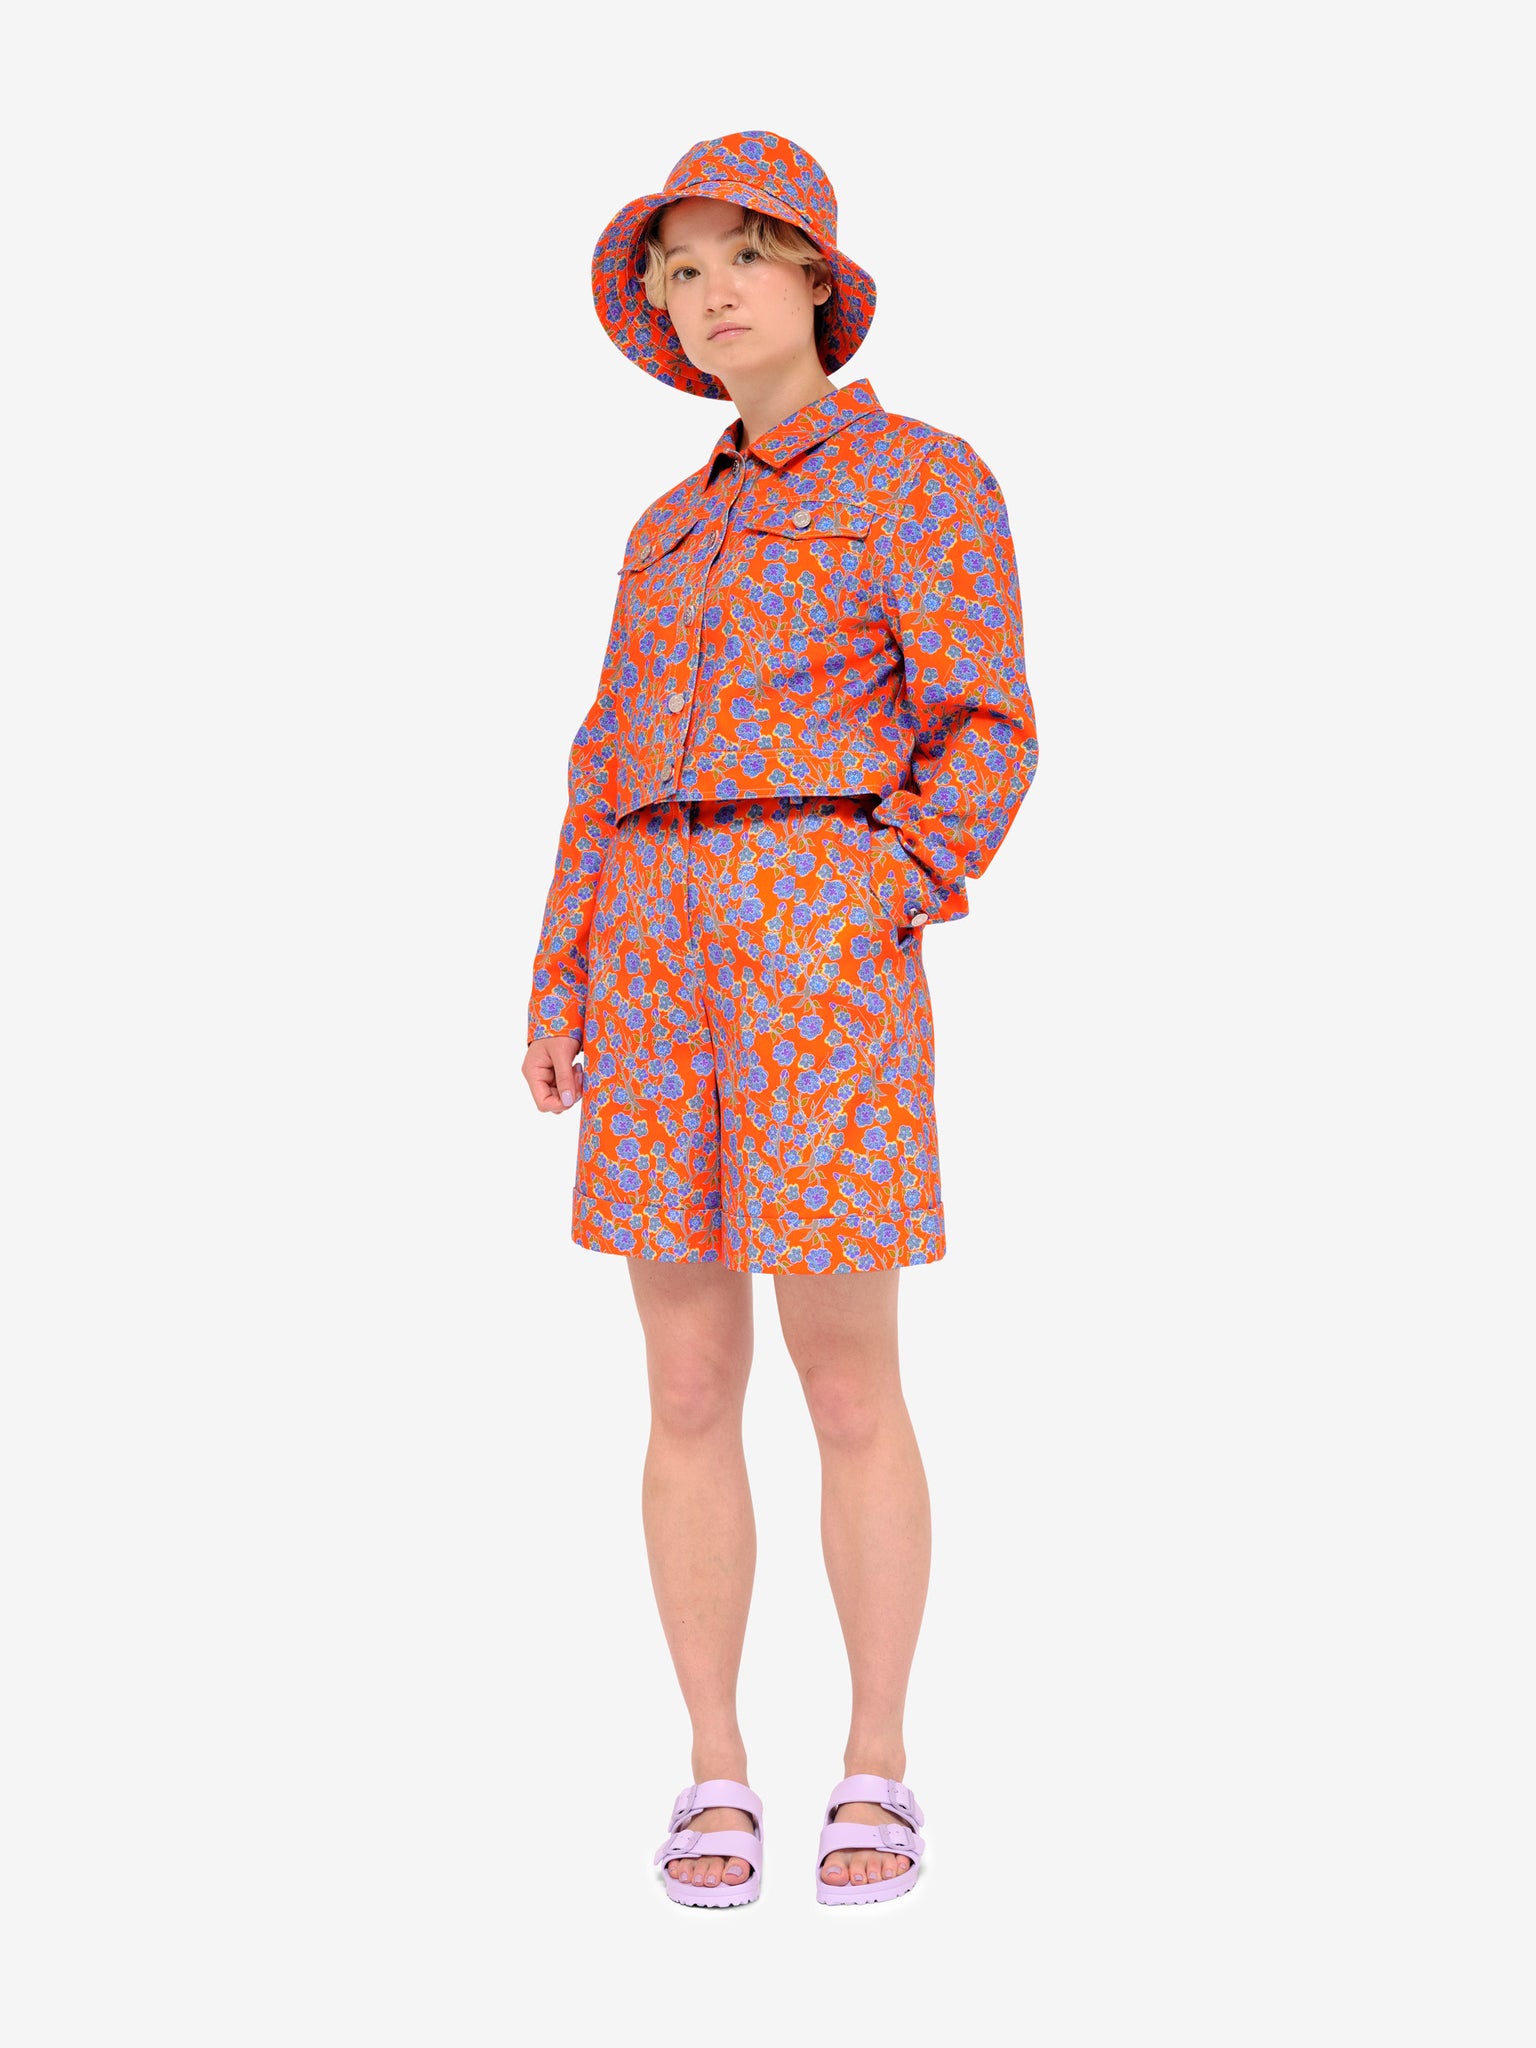 Model wearing Crimson Rose cropped cotton drill jacket and bucket hat with orange and blue floral print and lilac sandals. Photography Rowan Corr.